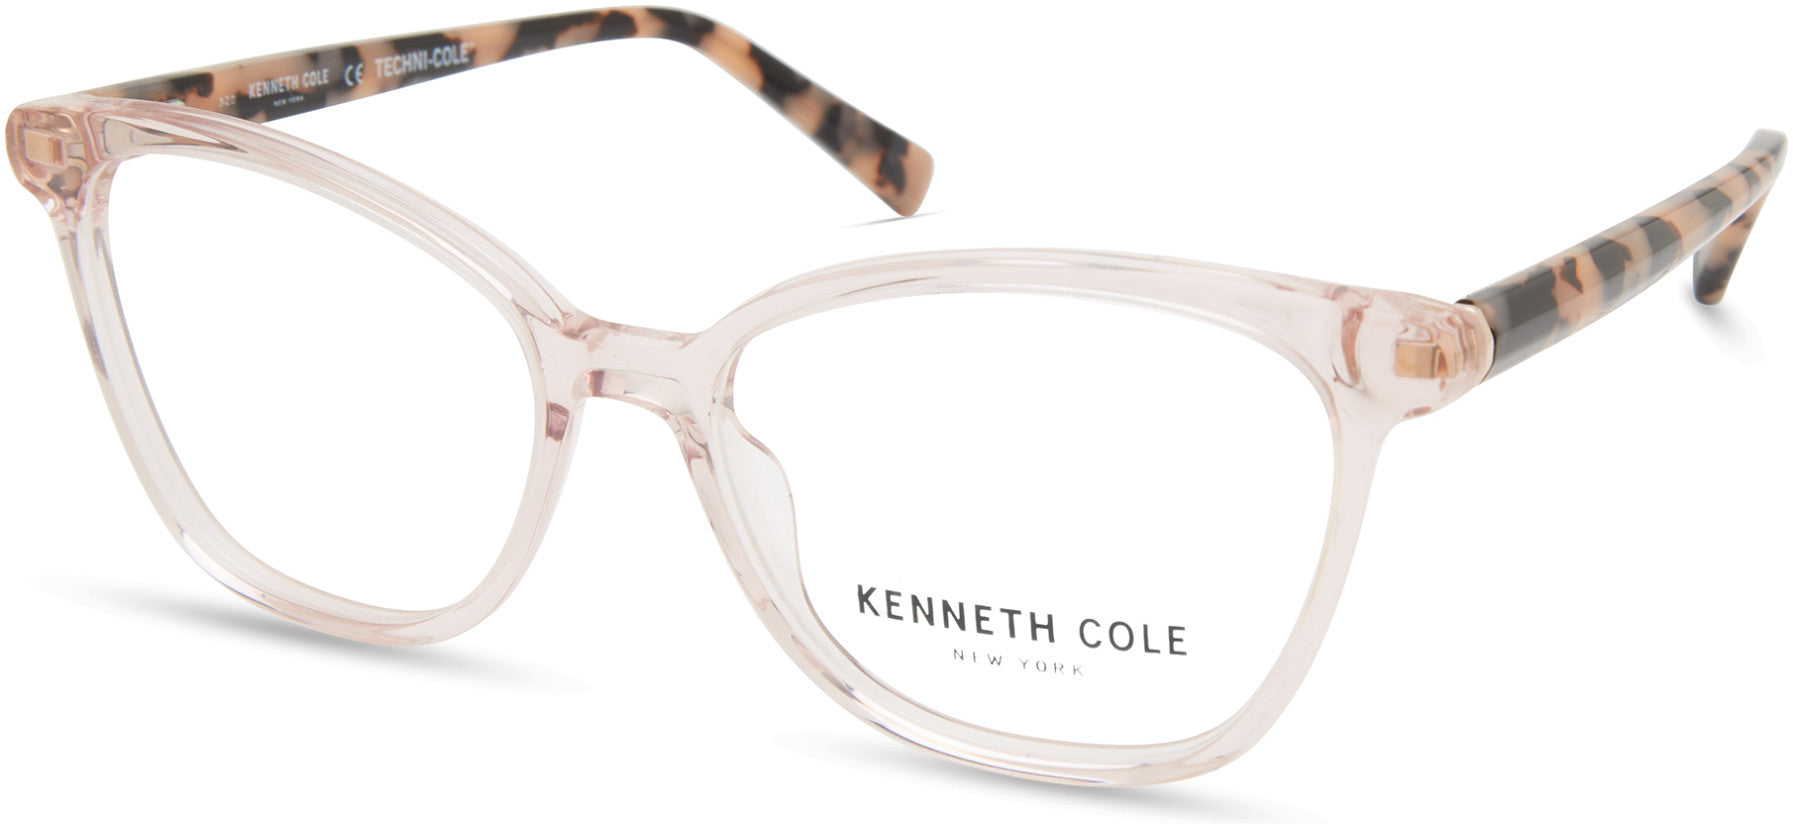 Kenneth Cole New York,Kenneth Cole Reaction KC0327 Square Eyeglasses 072-072 - Shiny Pink